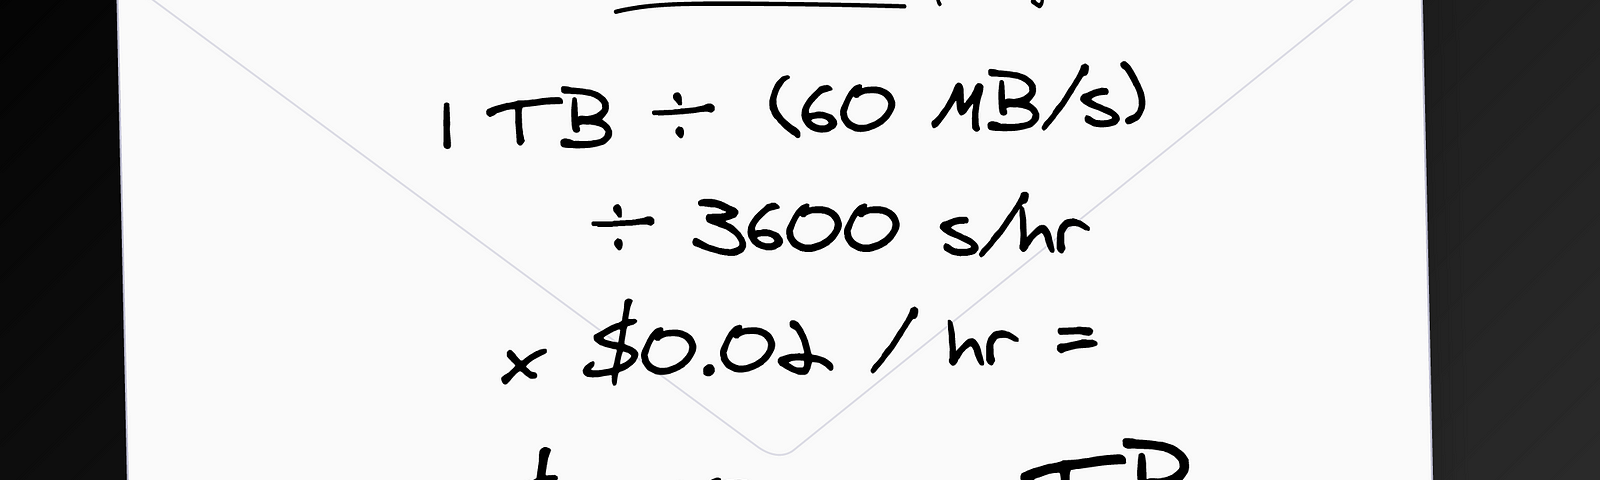 Back-of-the-envelope calculation for a simple workload bound primarily by network bandwidth. Calculation is 1 TB / (60 MB/s) / 3600 s/hr * $0.02 / hr = $0.10